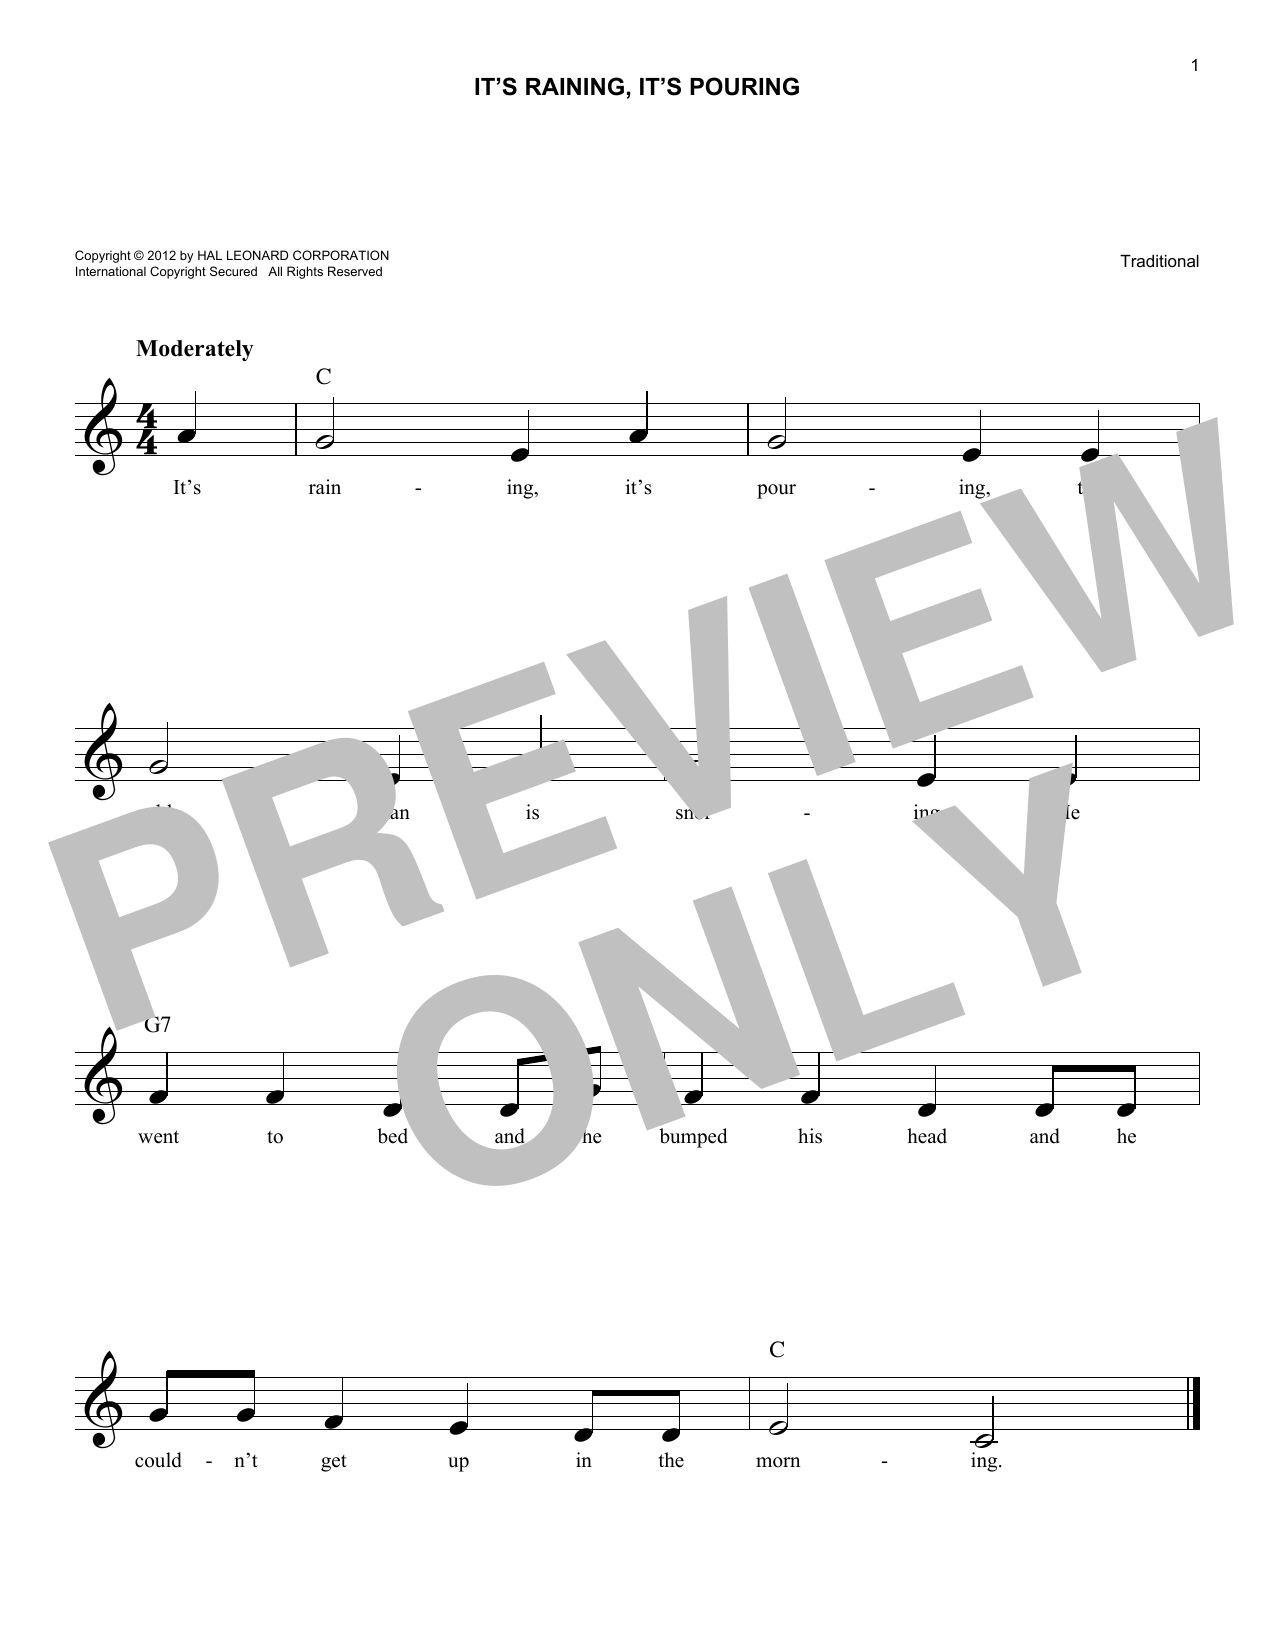 Download Traditional It's Raining, It's Pouring Sheet Music